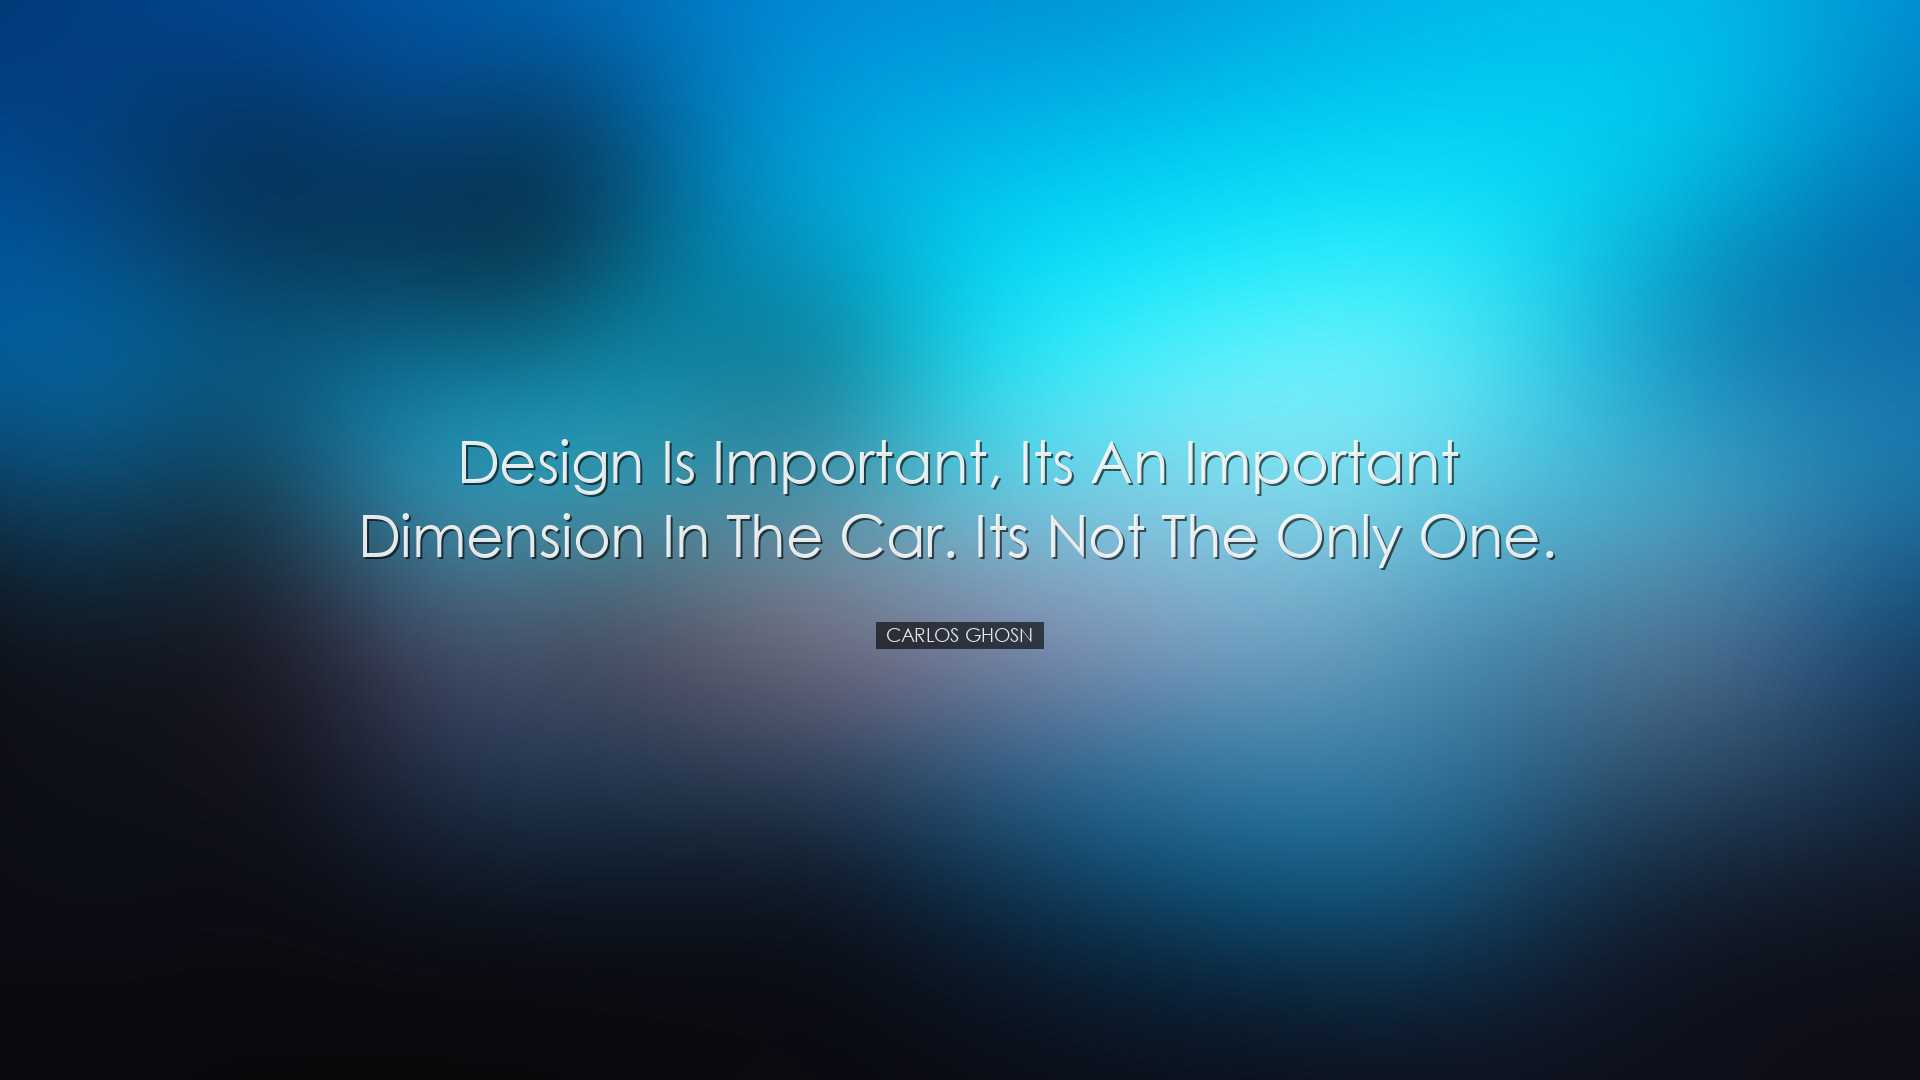 Design is important, its an important dimension in the car. Its no